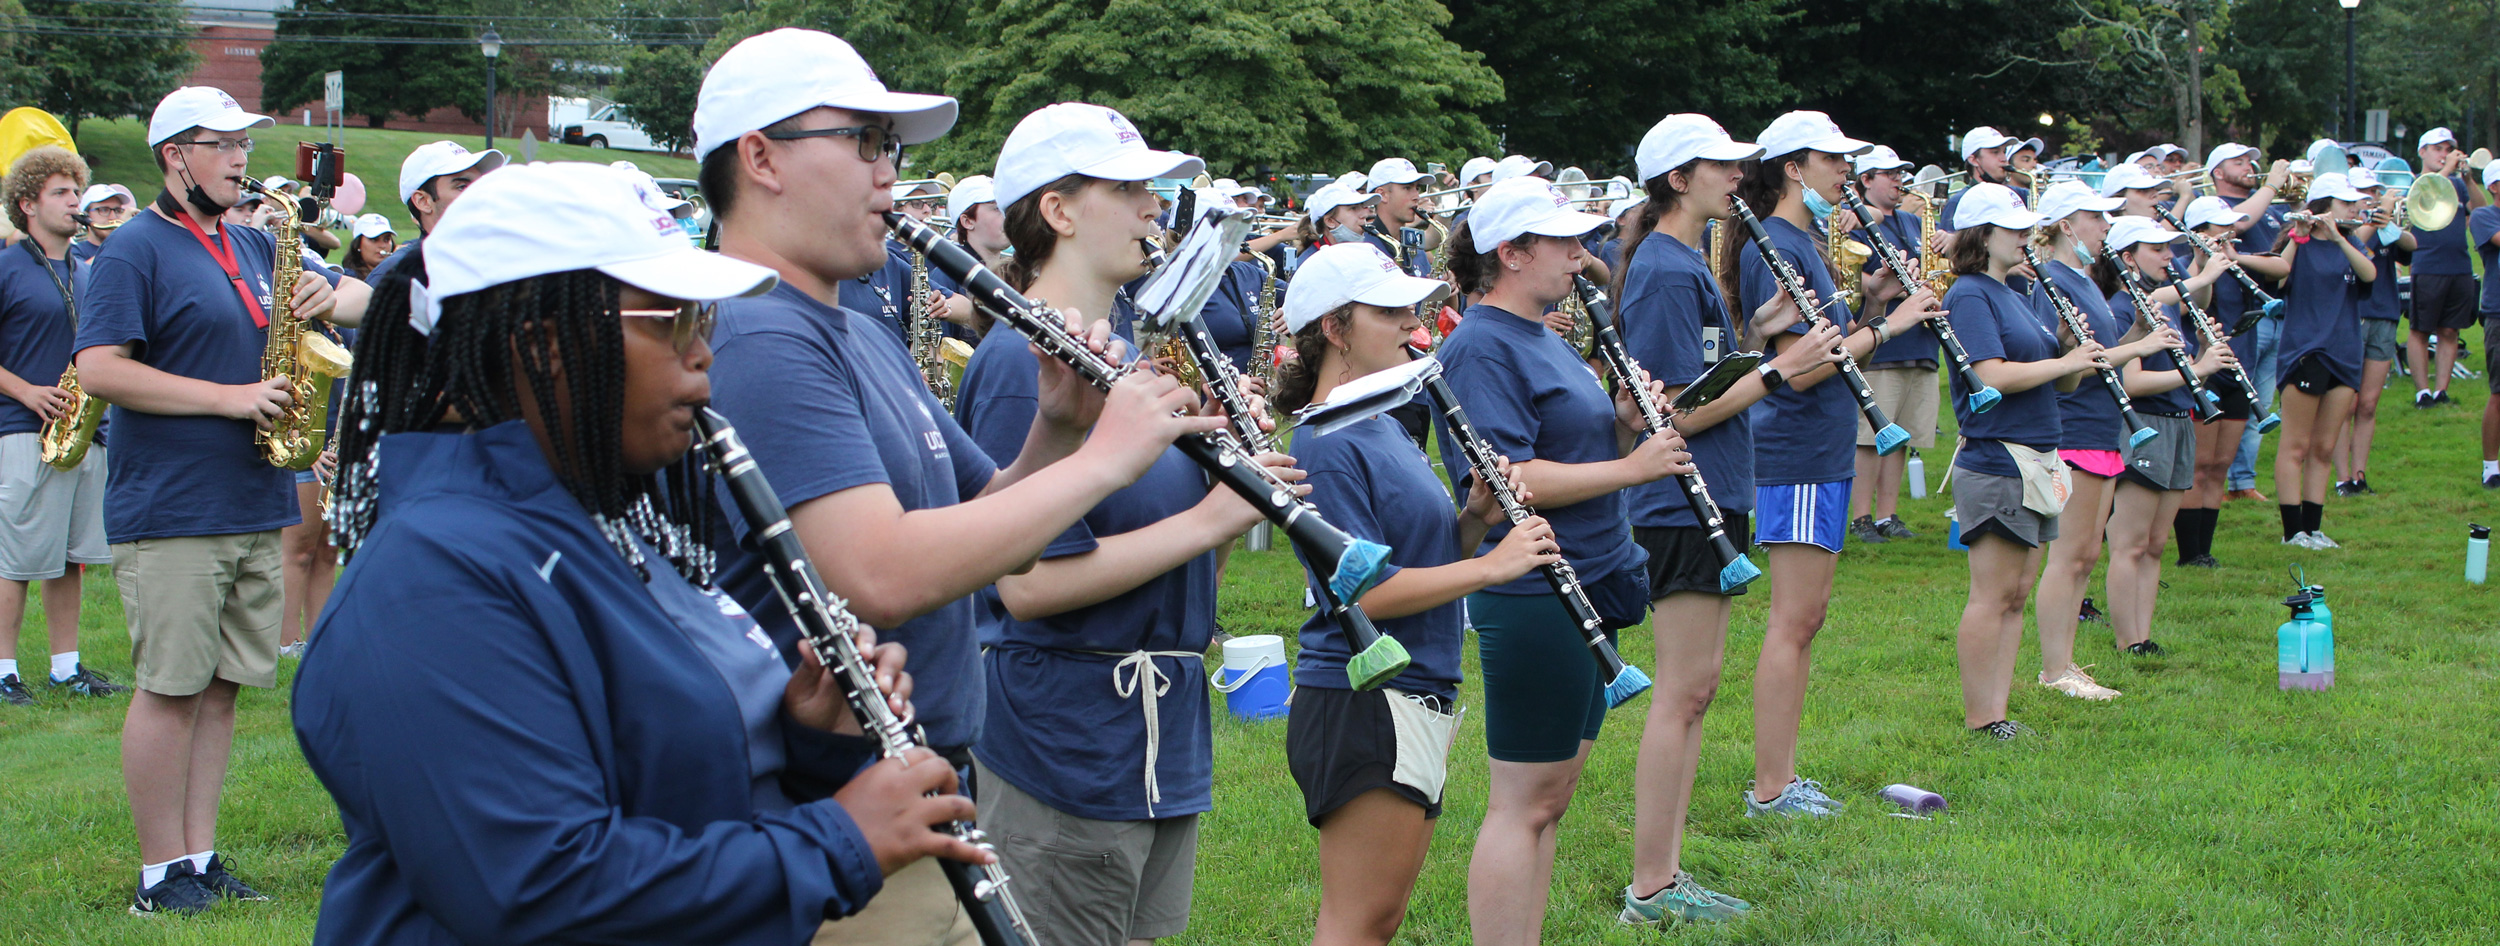 Clarinet sections practices during the summer on the lawn